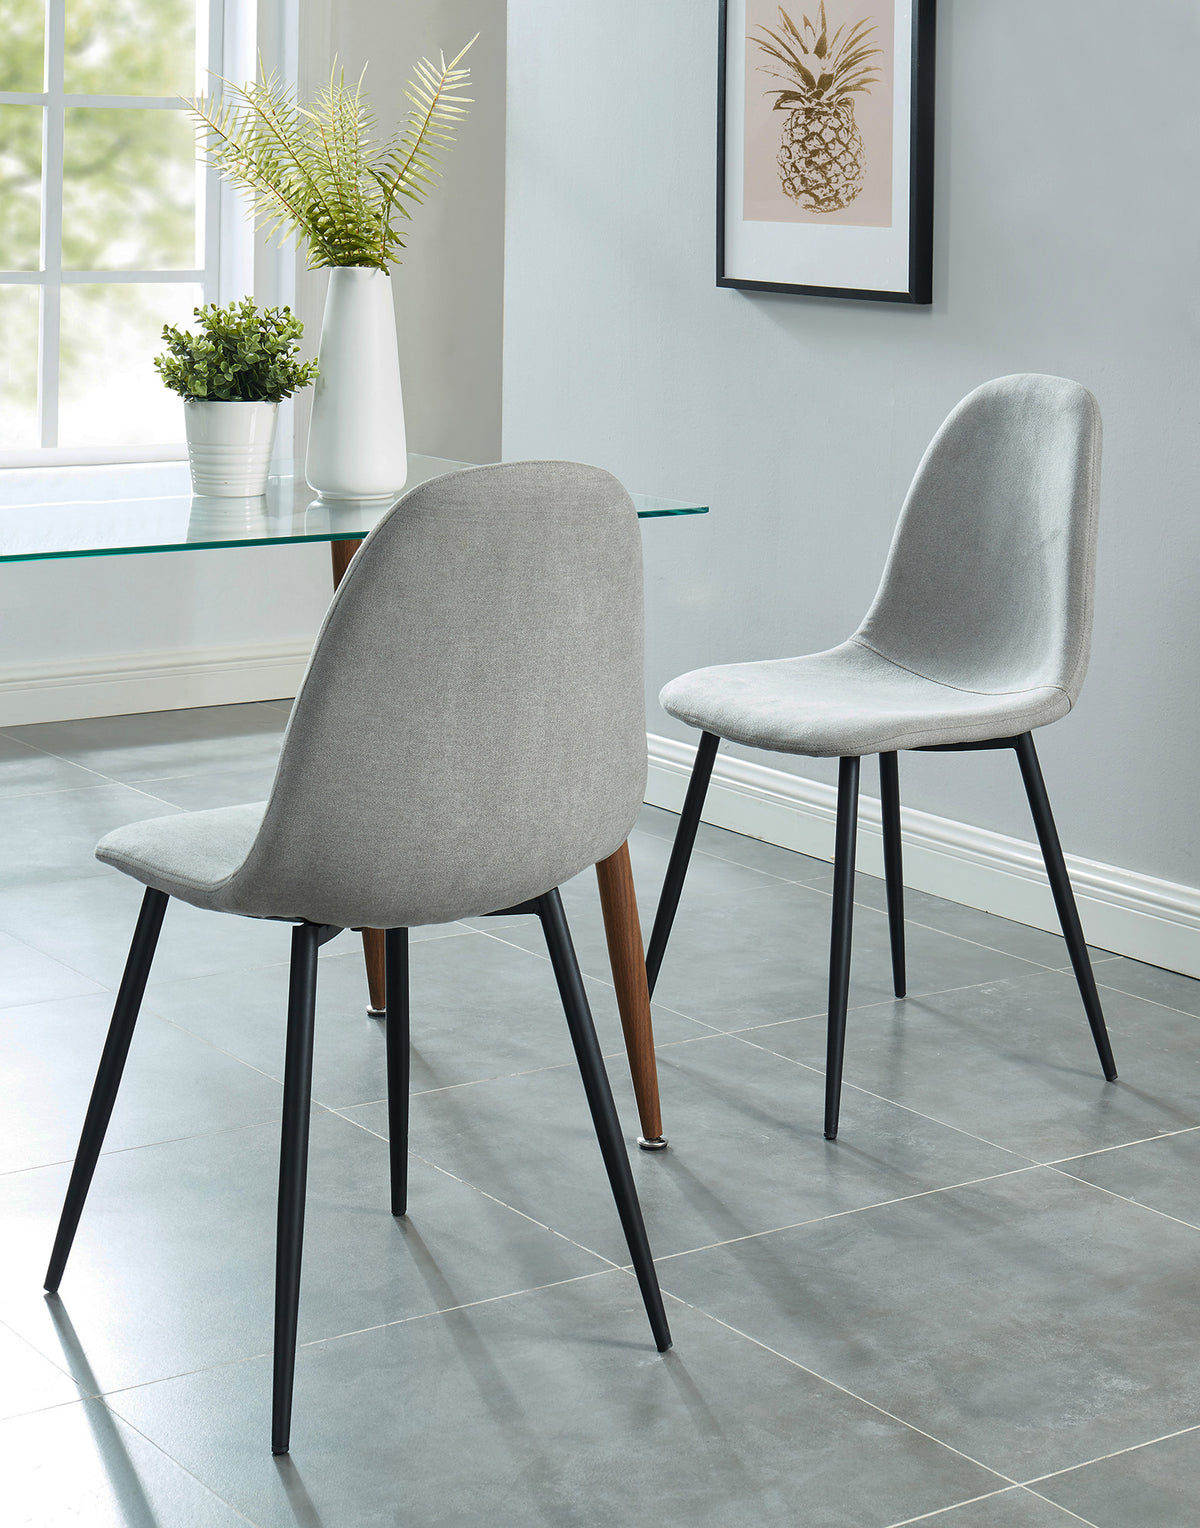 Dining Chairs | Find the perfect Dining Chairs for your Dining Room